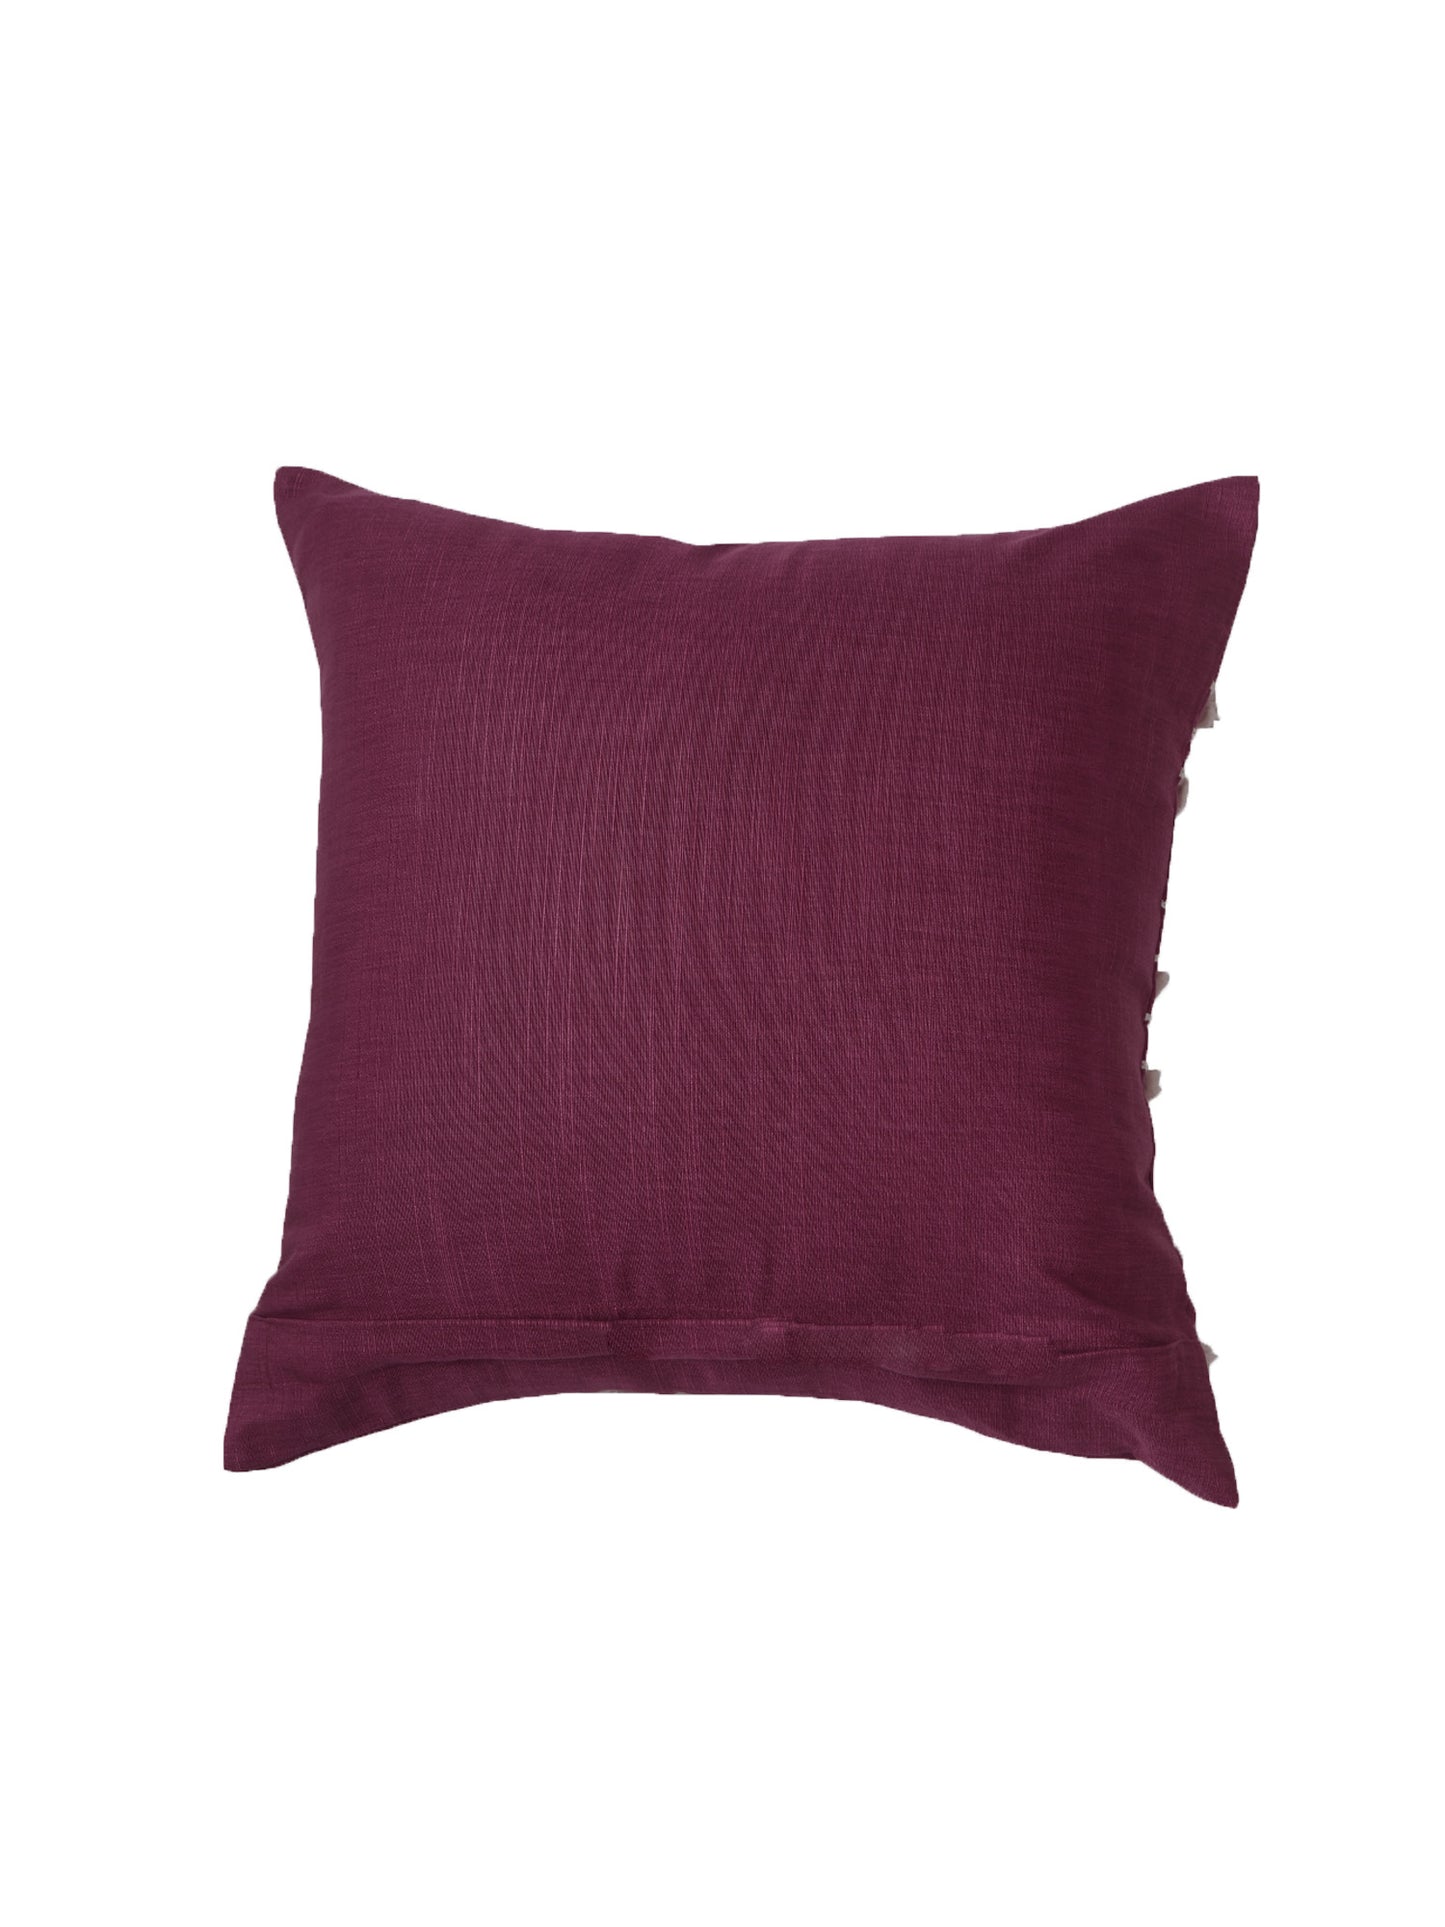 Cushion Cover Embroidered Polyester Blend Wine Red - 16" x 16"